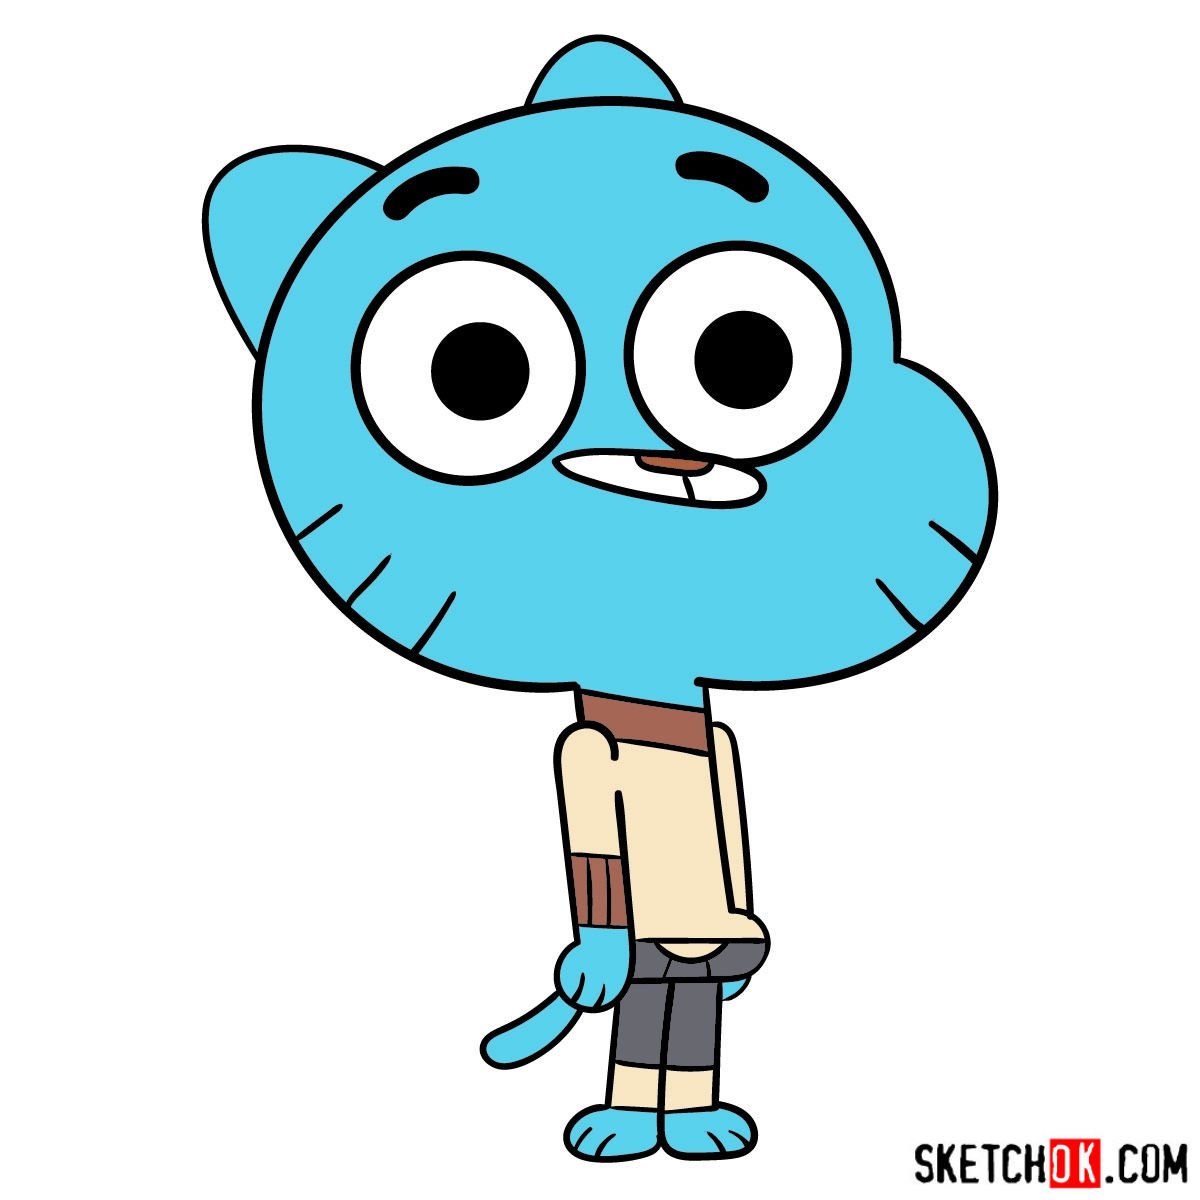 The Amazing World of Gumball Archives - Sketchok easy drawing guides